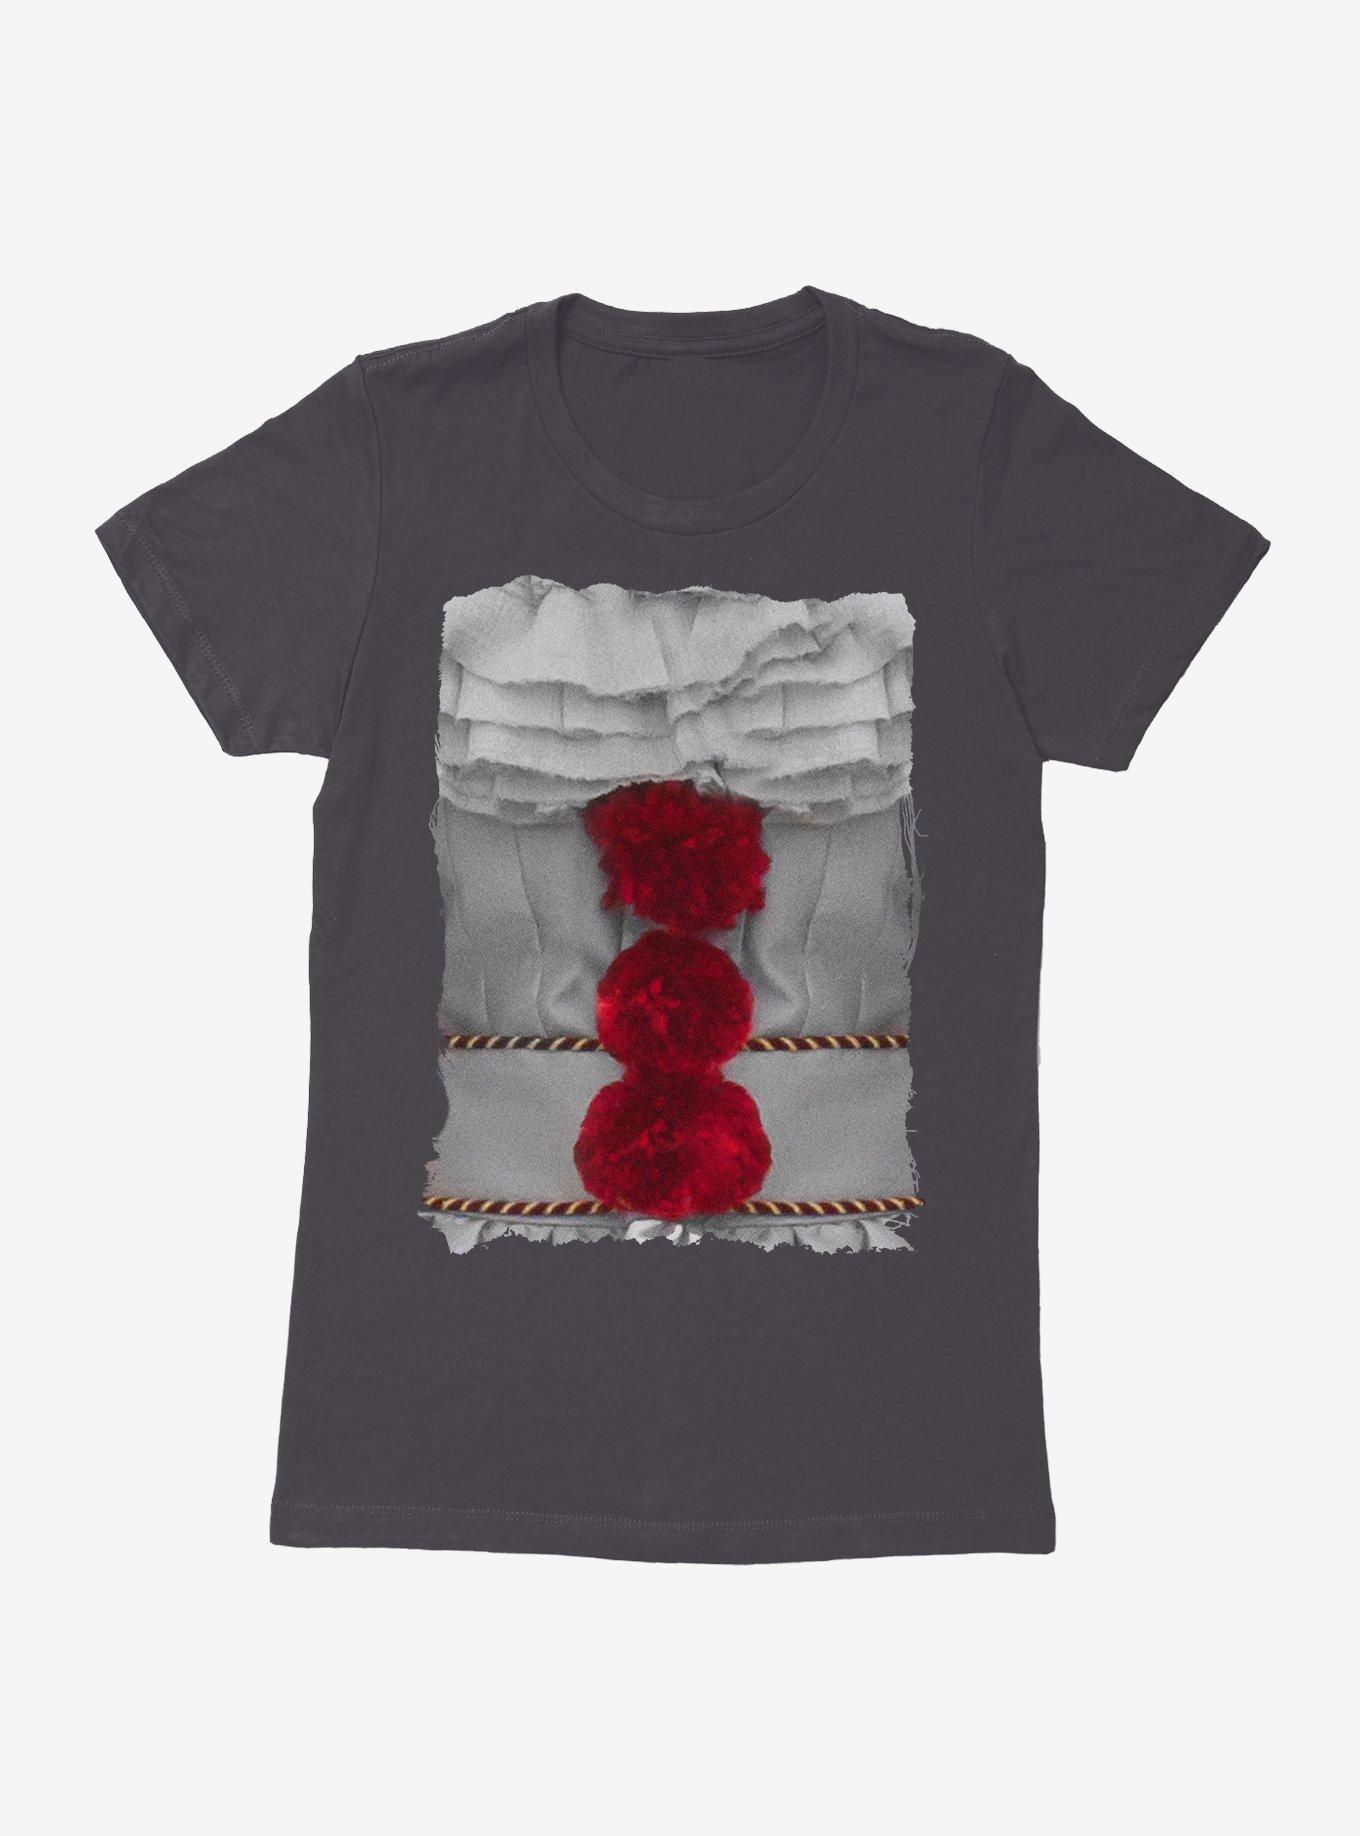 IT Chapter 2 Pennywise Cosplay Womens T-Shirt, HEAVY METAL, hi-res